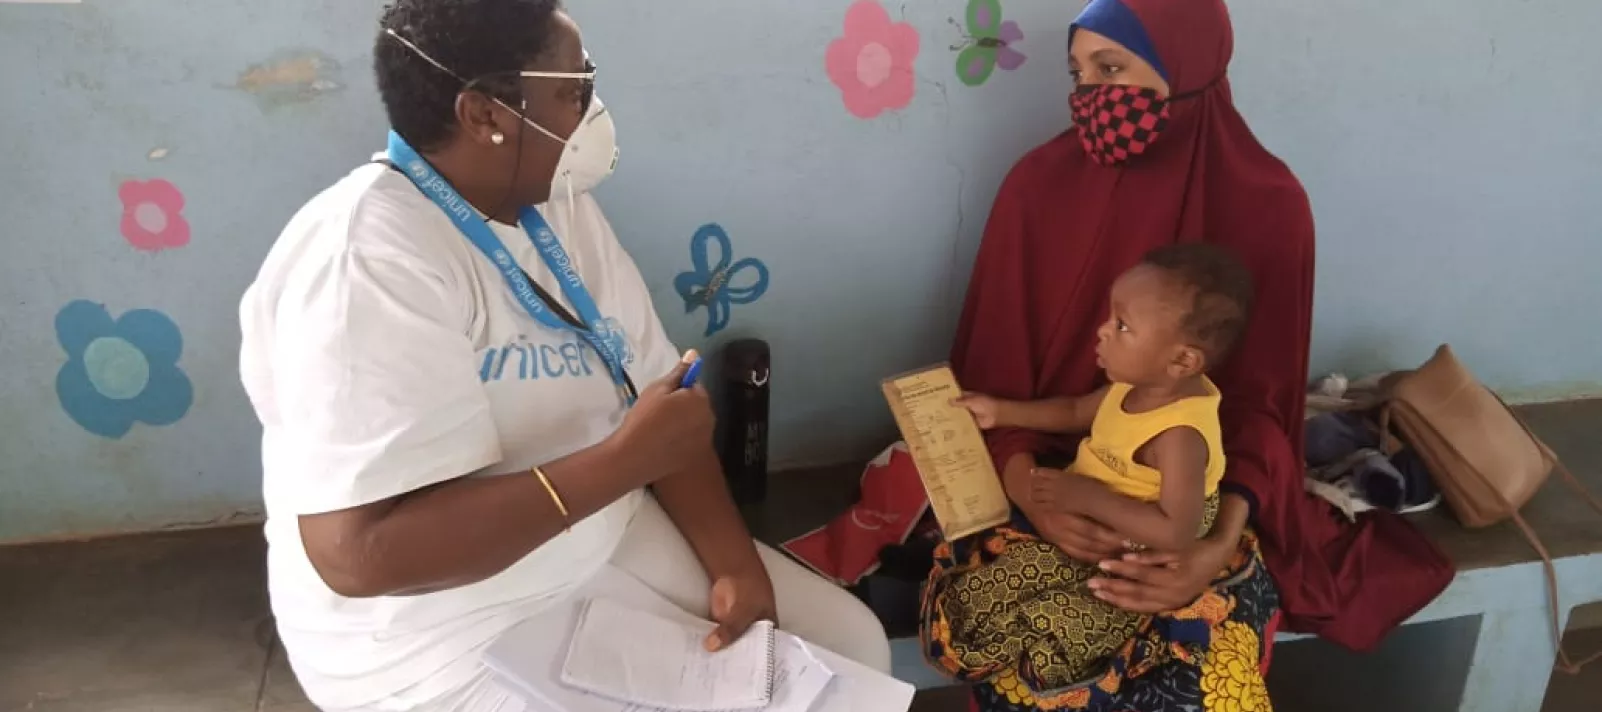 Interview with a caregiver in Nampula, Mozambique, 2021